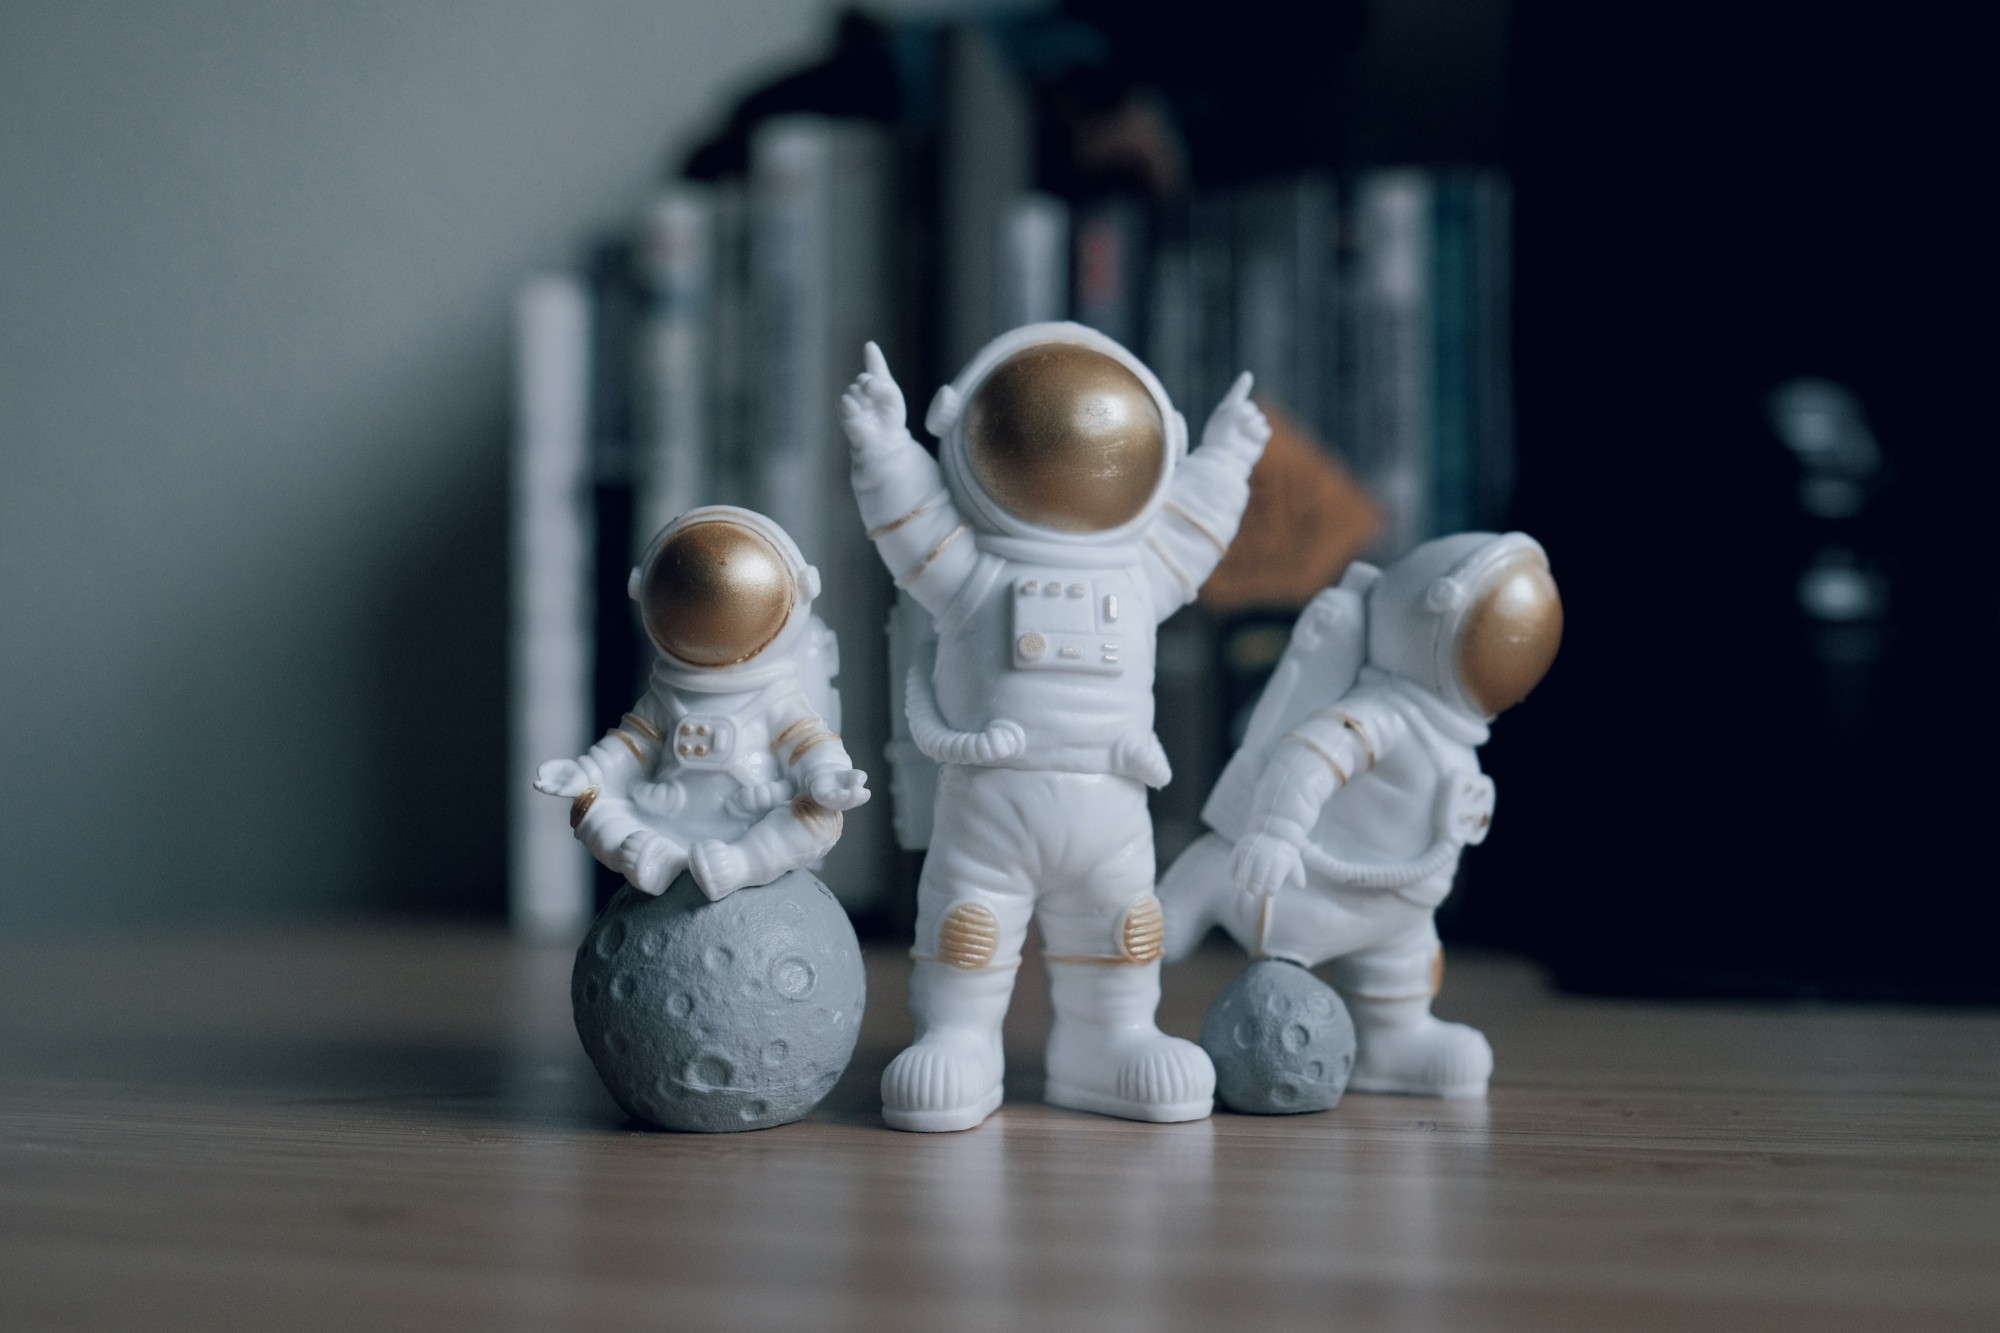 Picture of astronaut figurines